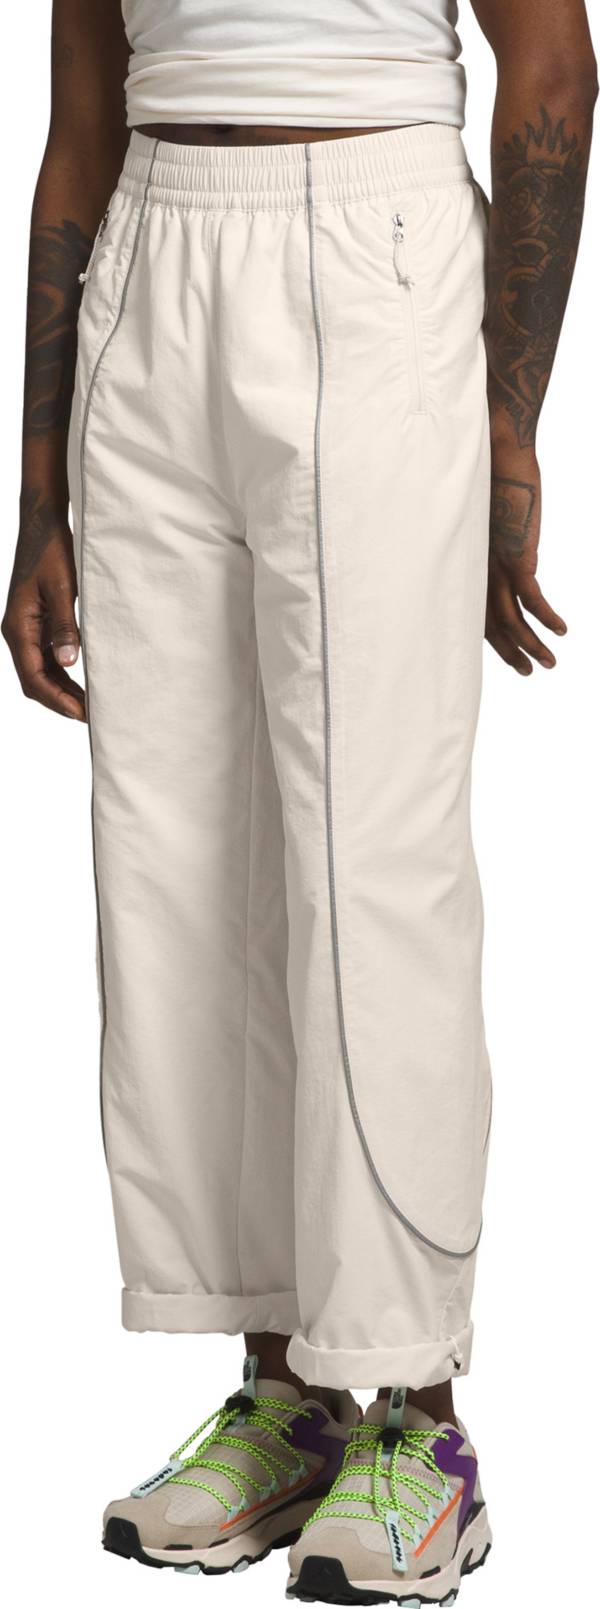 The North Face Women's Tek Piping Wind Pants product image